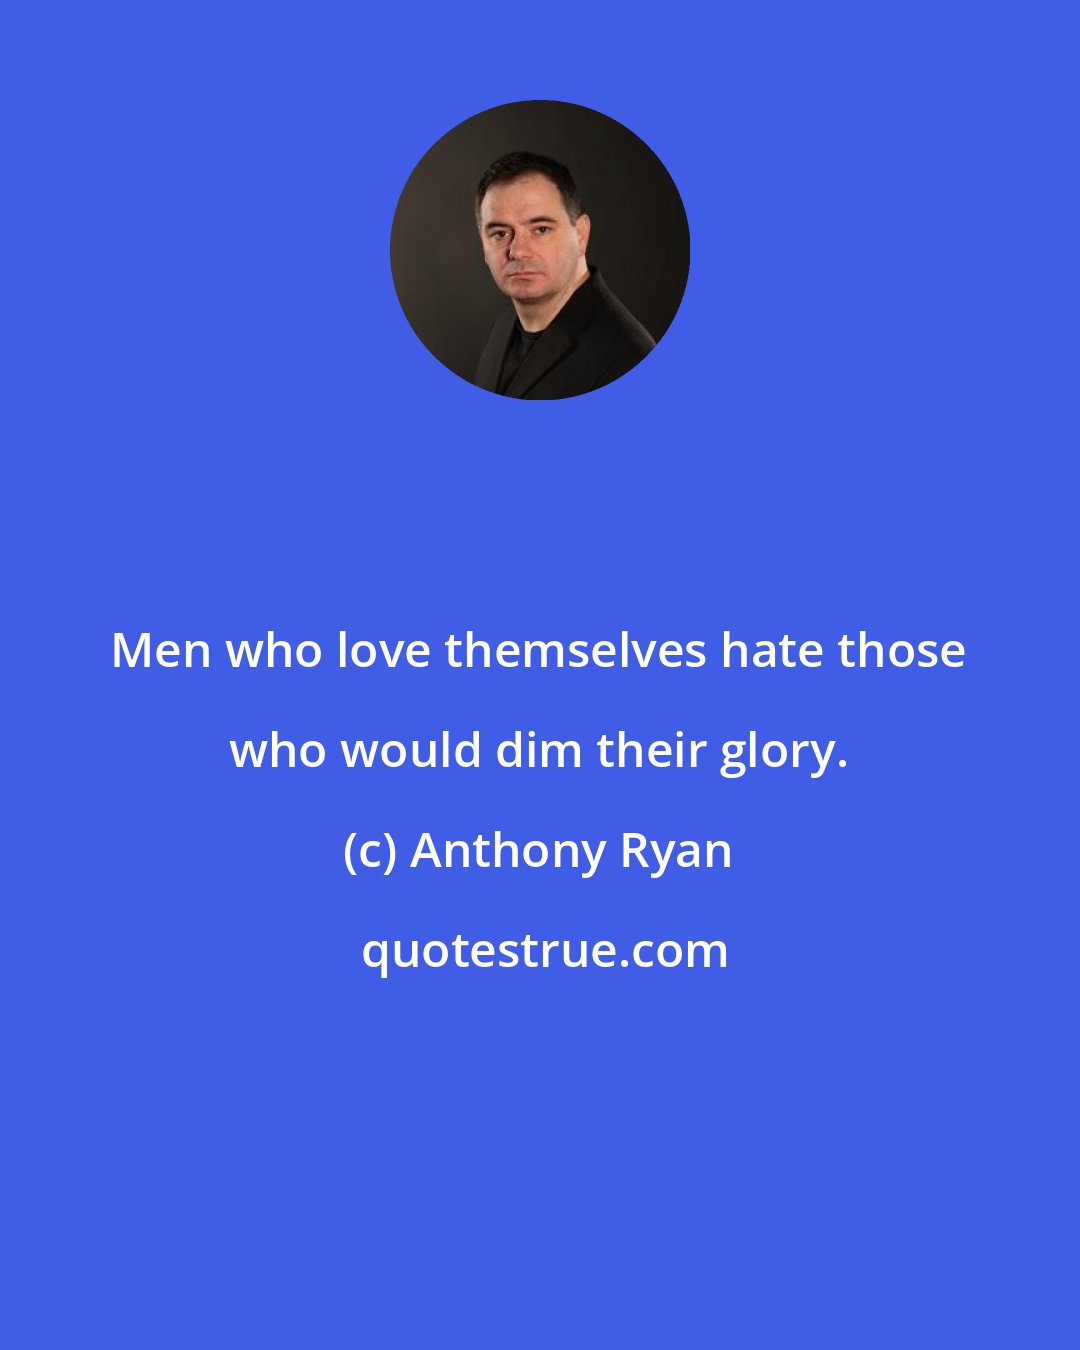 Anthony Ryan: Men who love themselves hate those who would dim their glory.